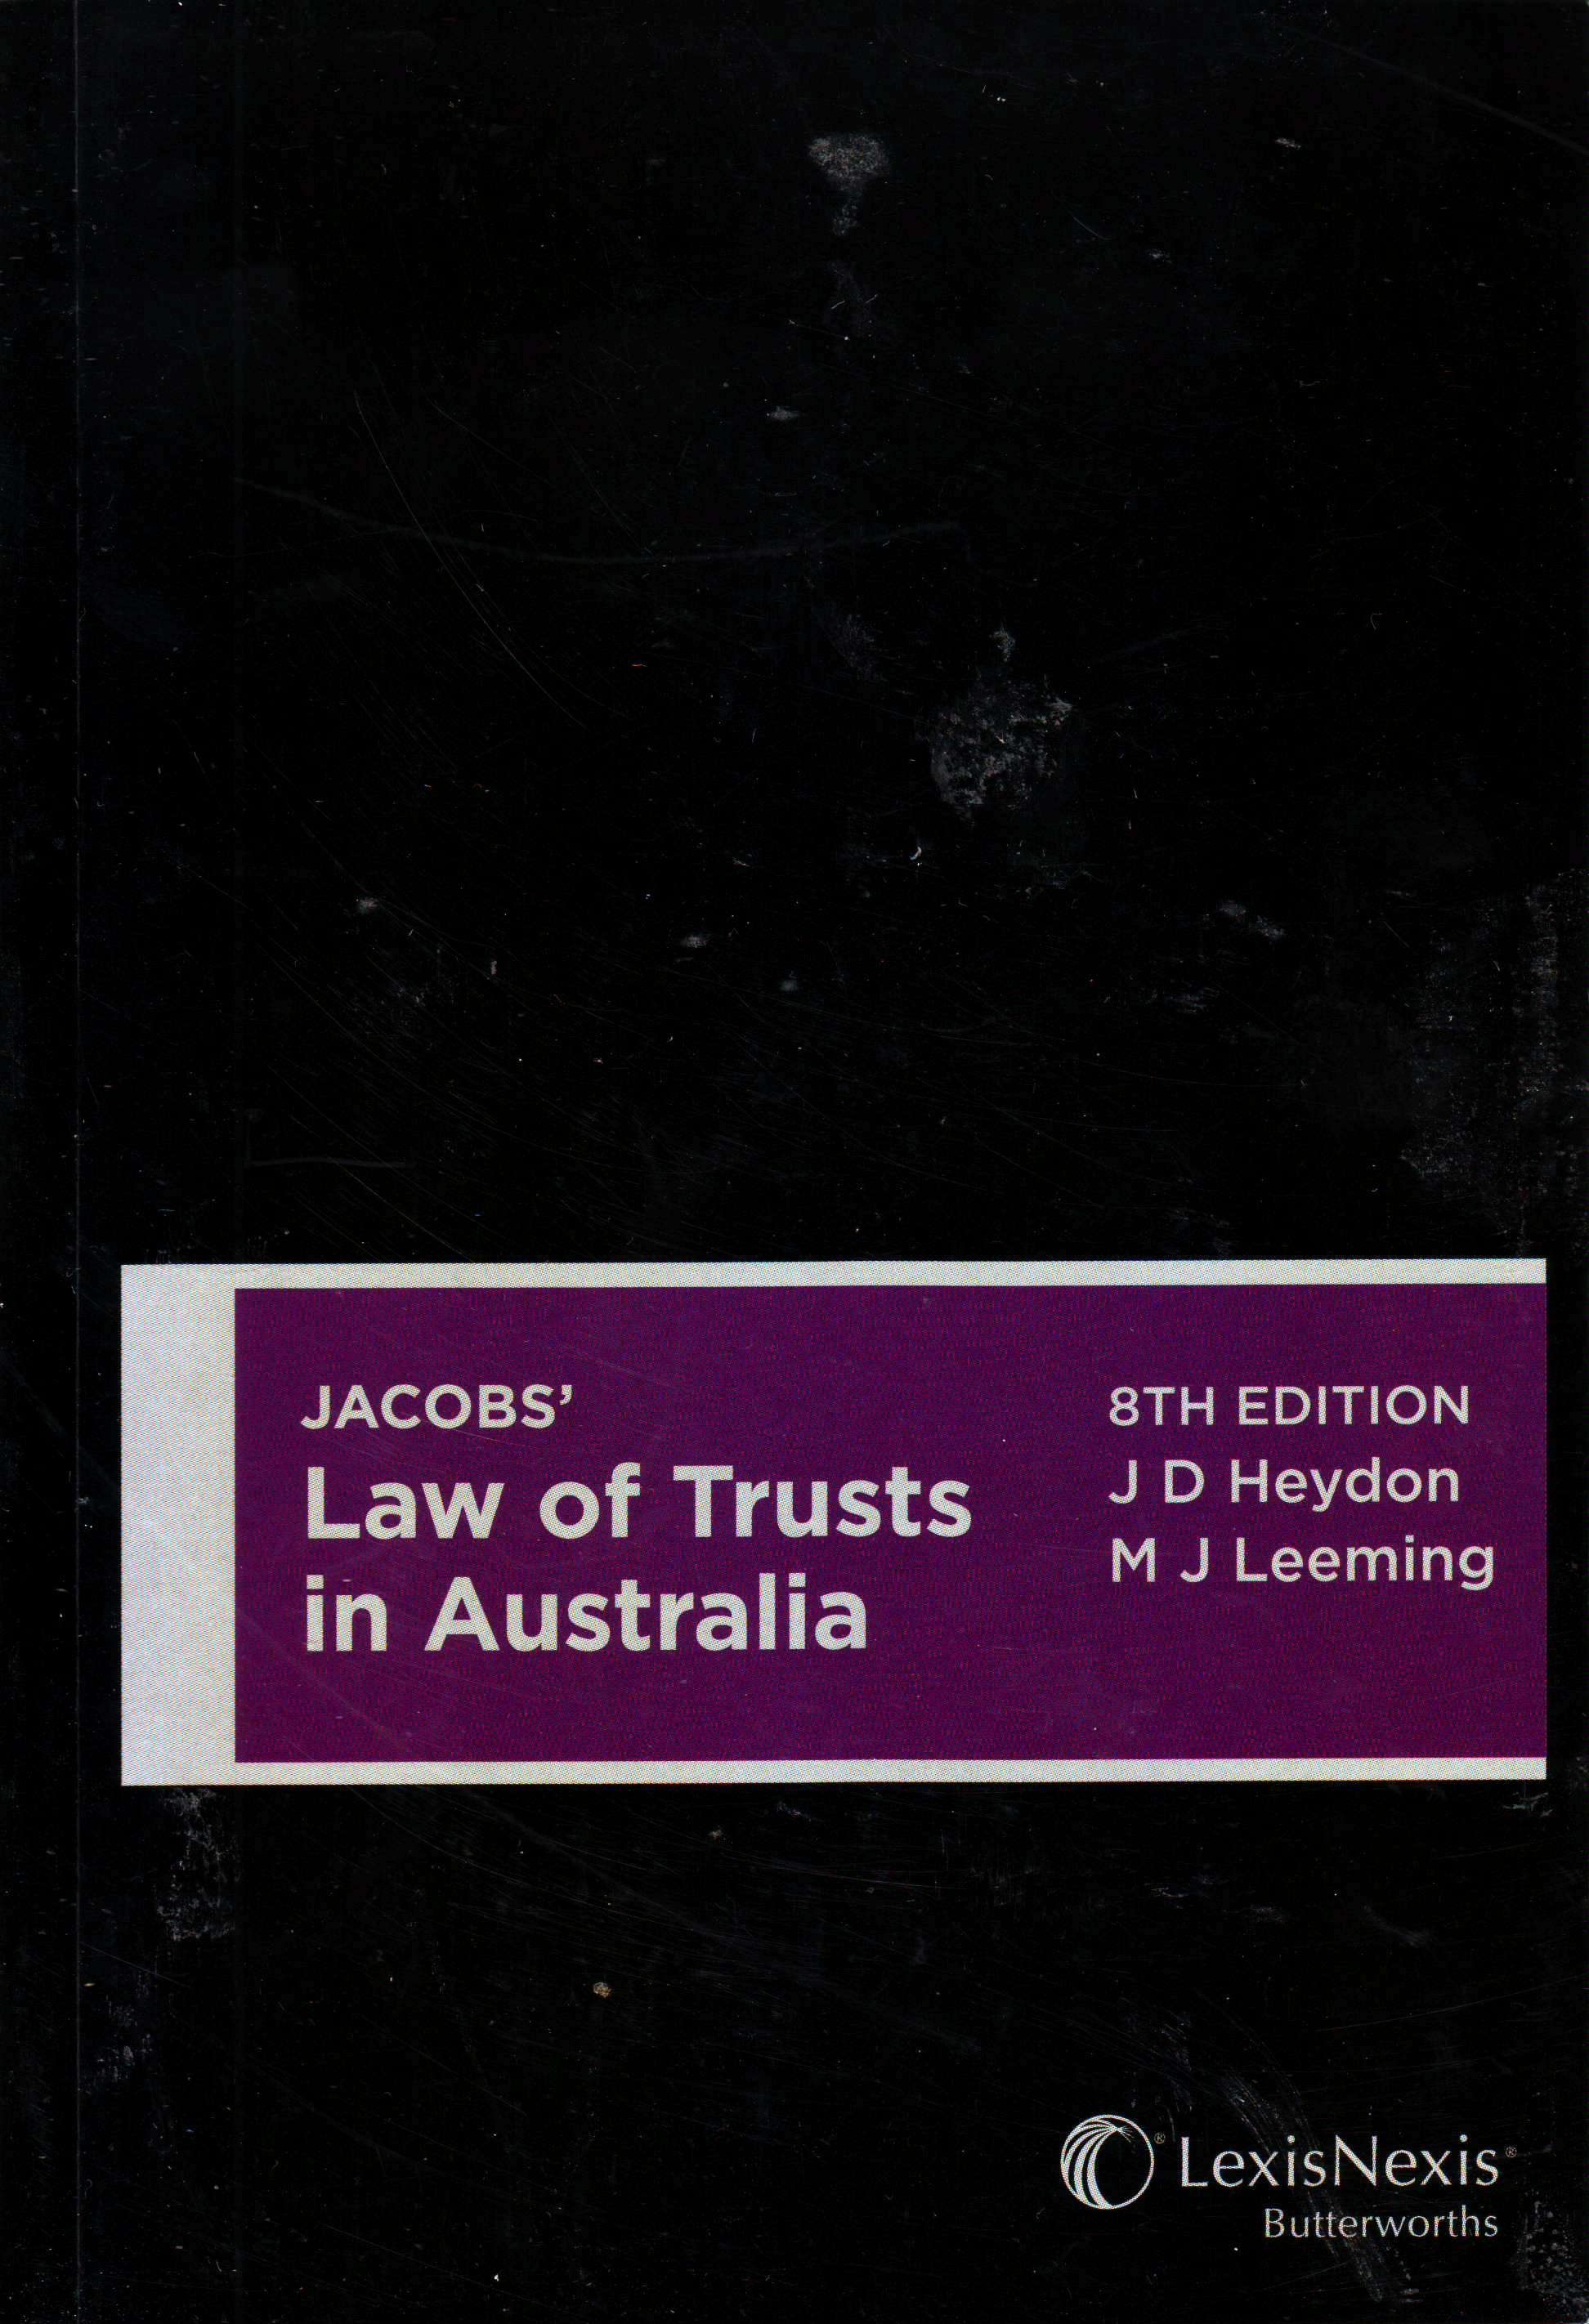 Jacobs’ Law of Trusts in Australia e8 (softcover)